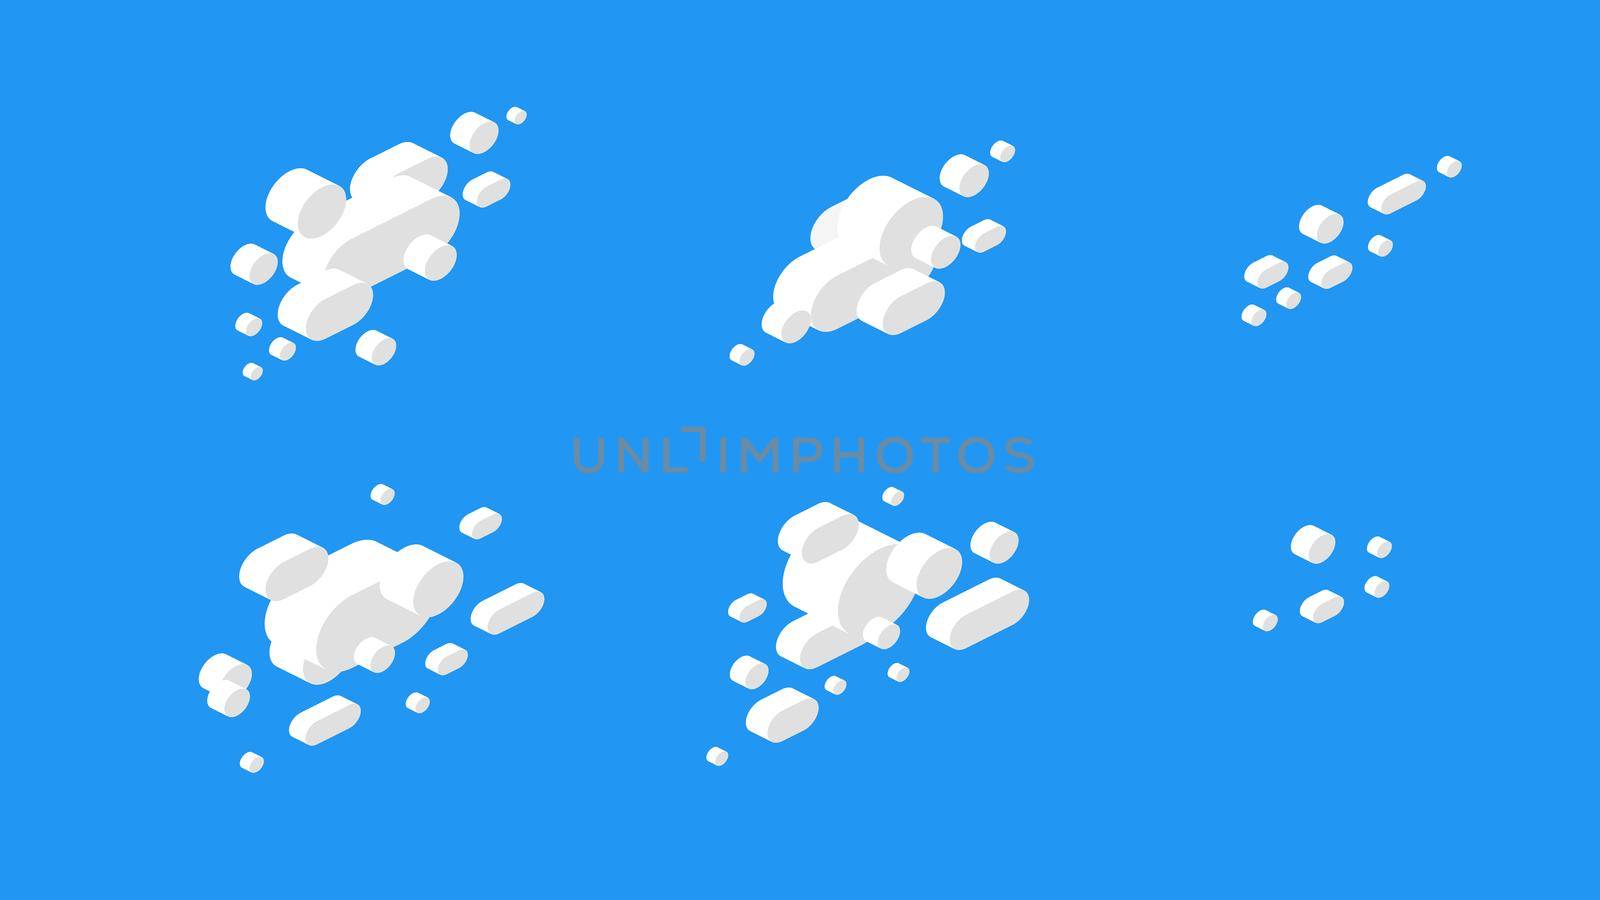 Isometric cloudscape. Abstract vector isometric clouds. 3d futuristic cloud icons for backdrops. Geometric white clouds on blue backround.